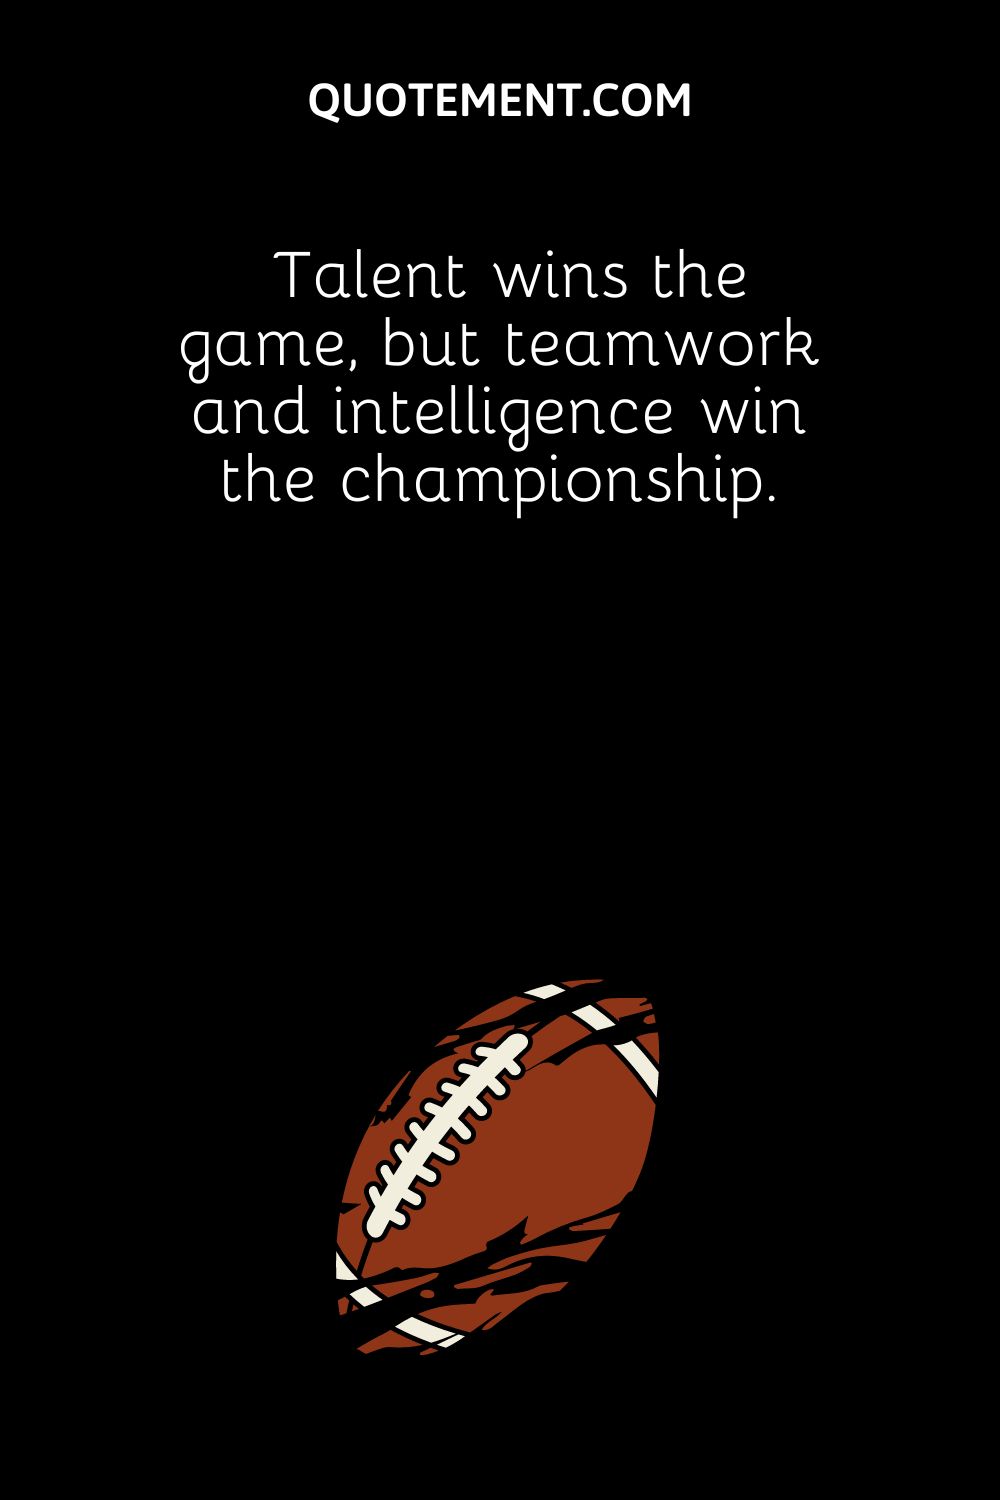 Talent wins the game, but teamwork and intelligence win the championship